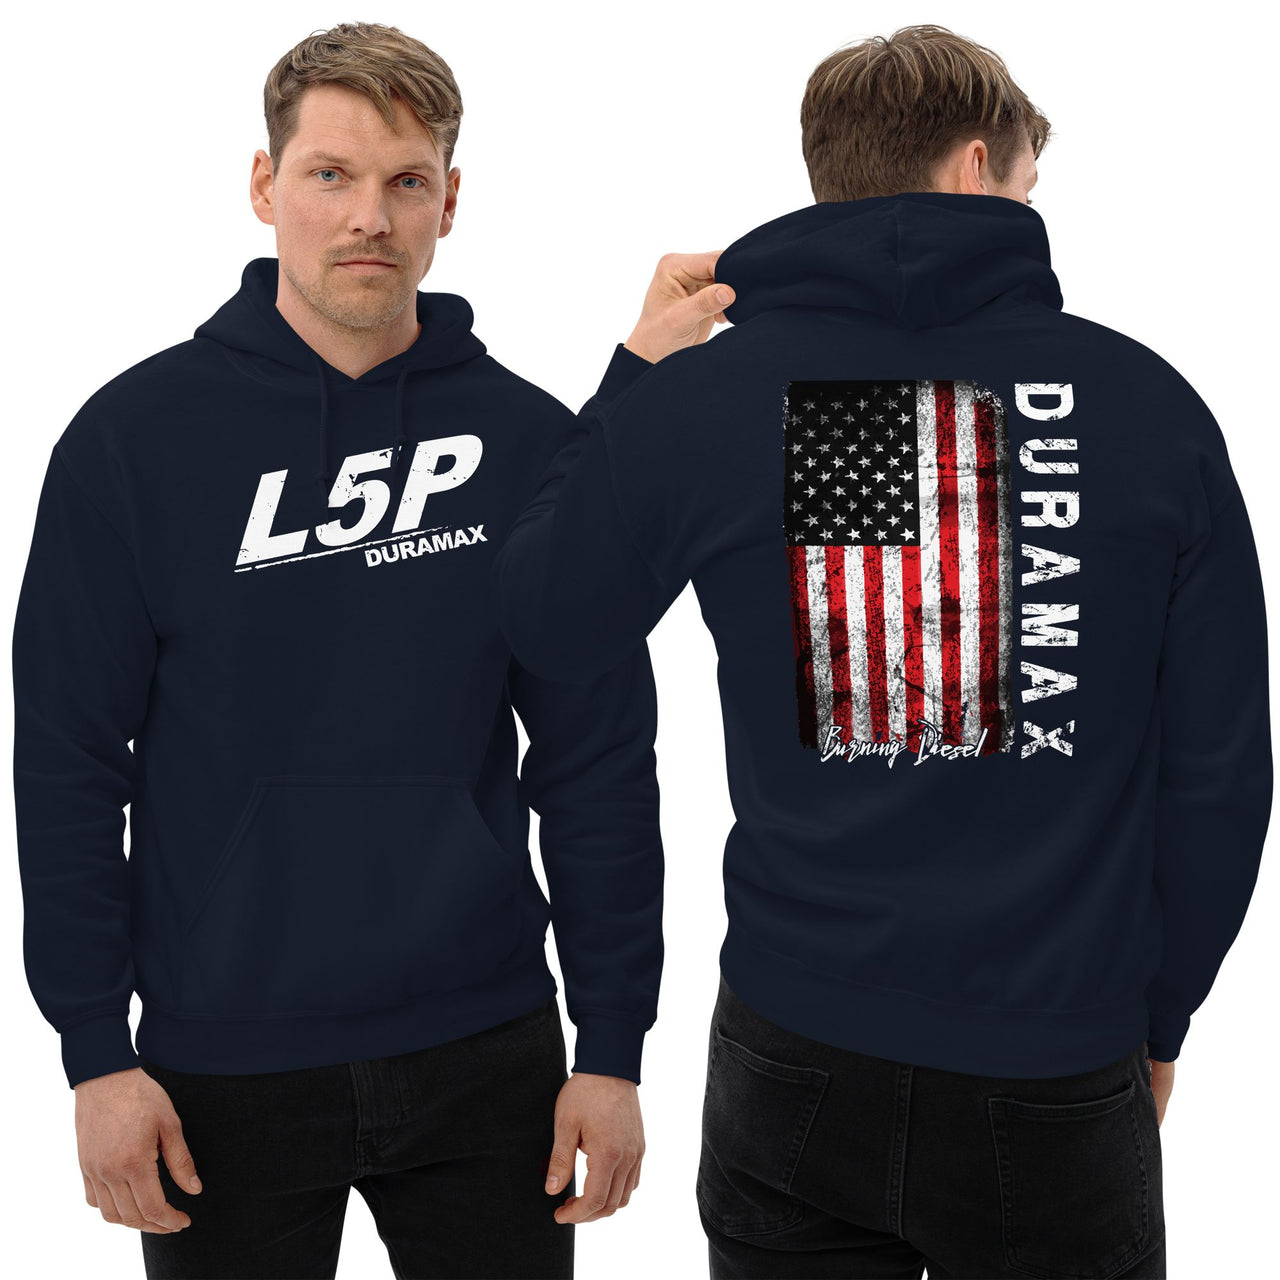 L5p Duramax Hoodie With American Flag Design-In-Black-From Aggressive Thread